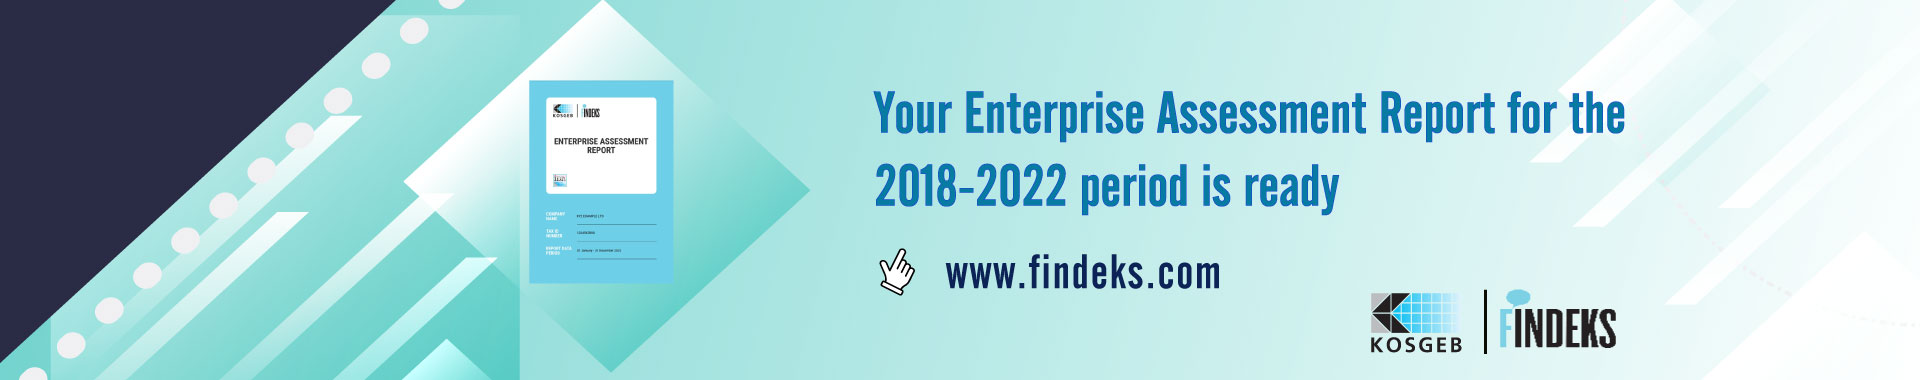 Enterprise Assessment Reports containing the data for the 2018-2022 period is now available